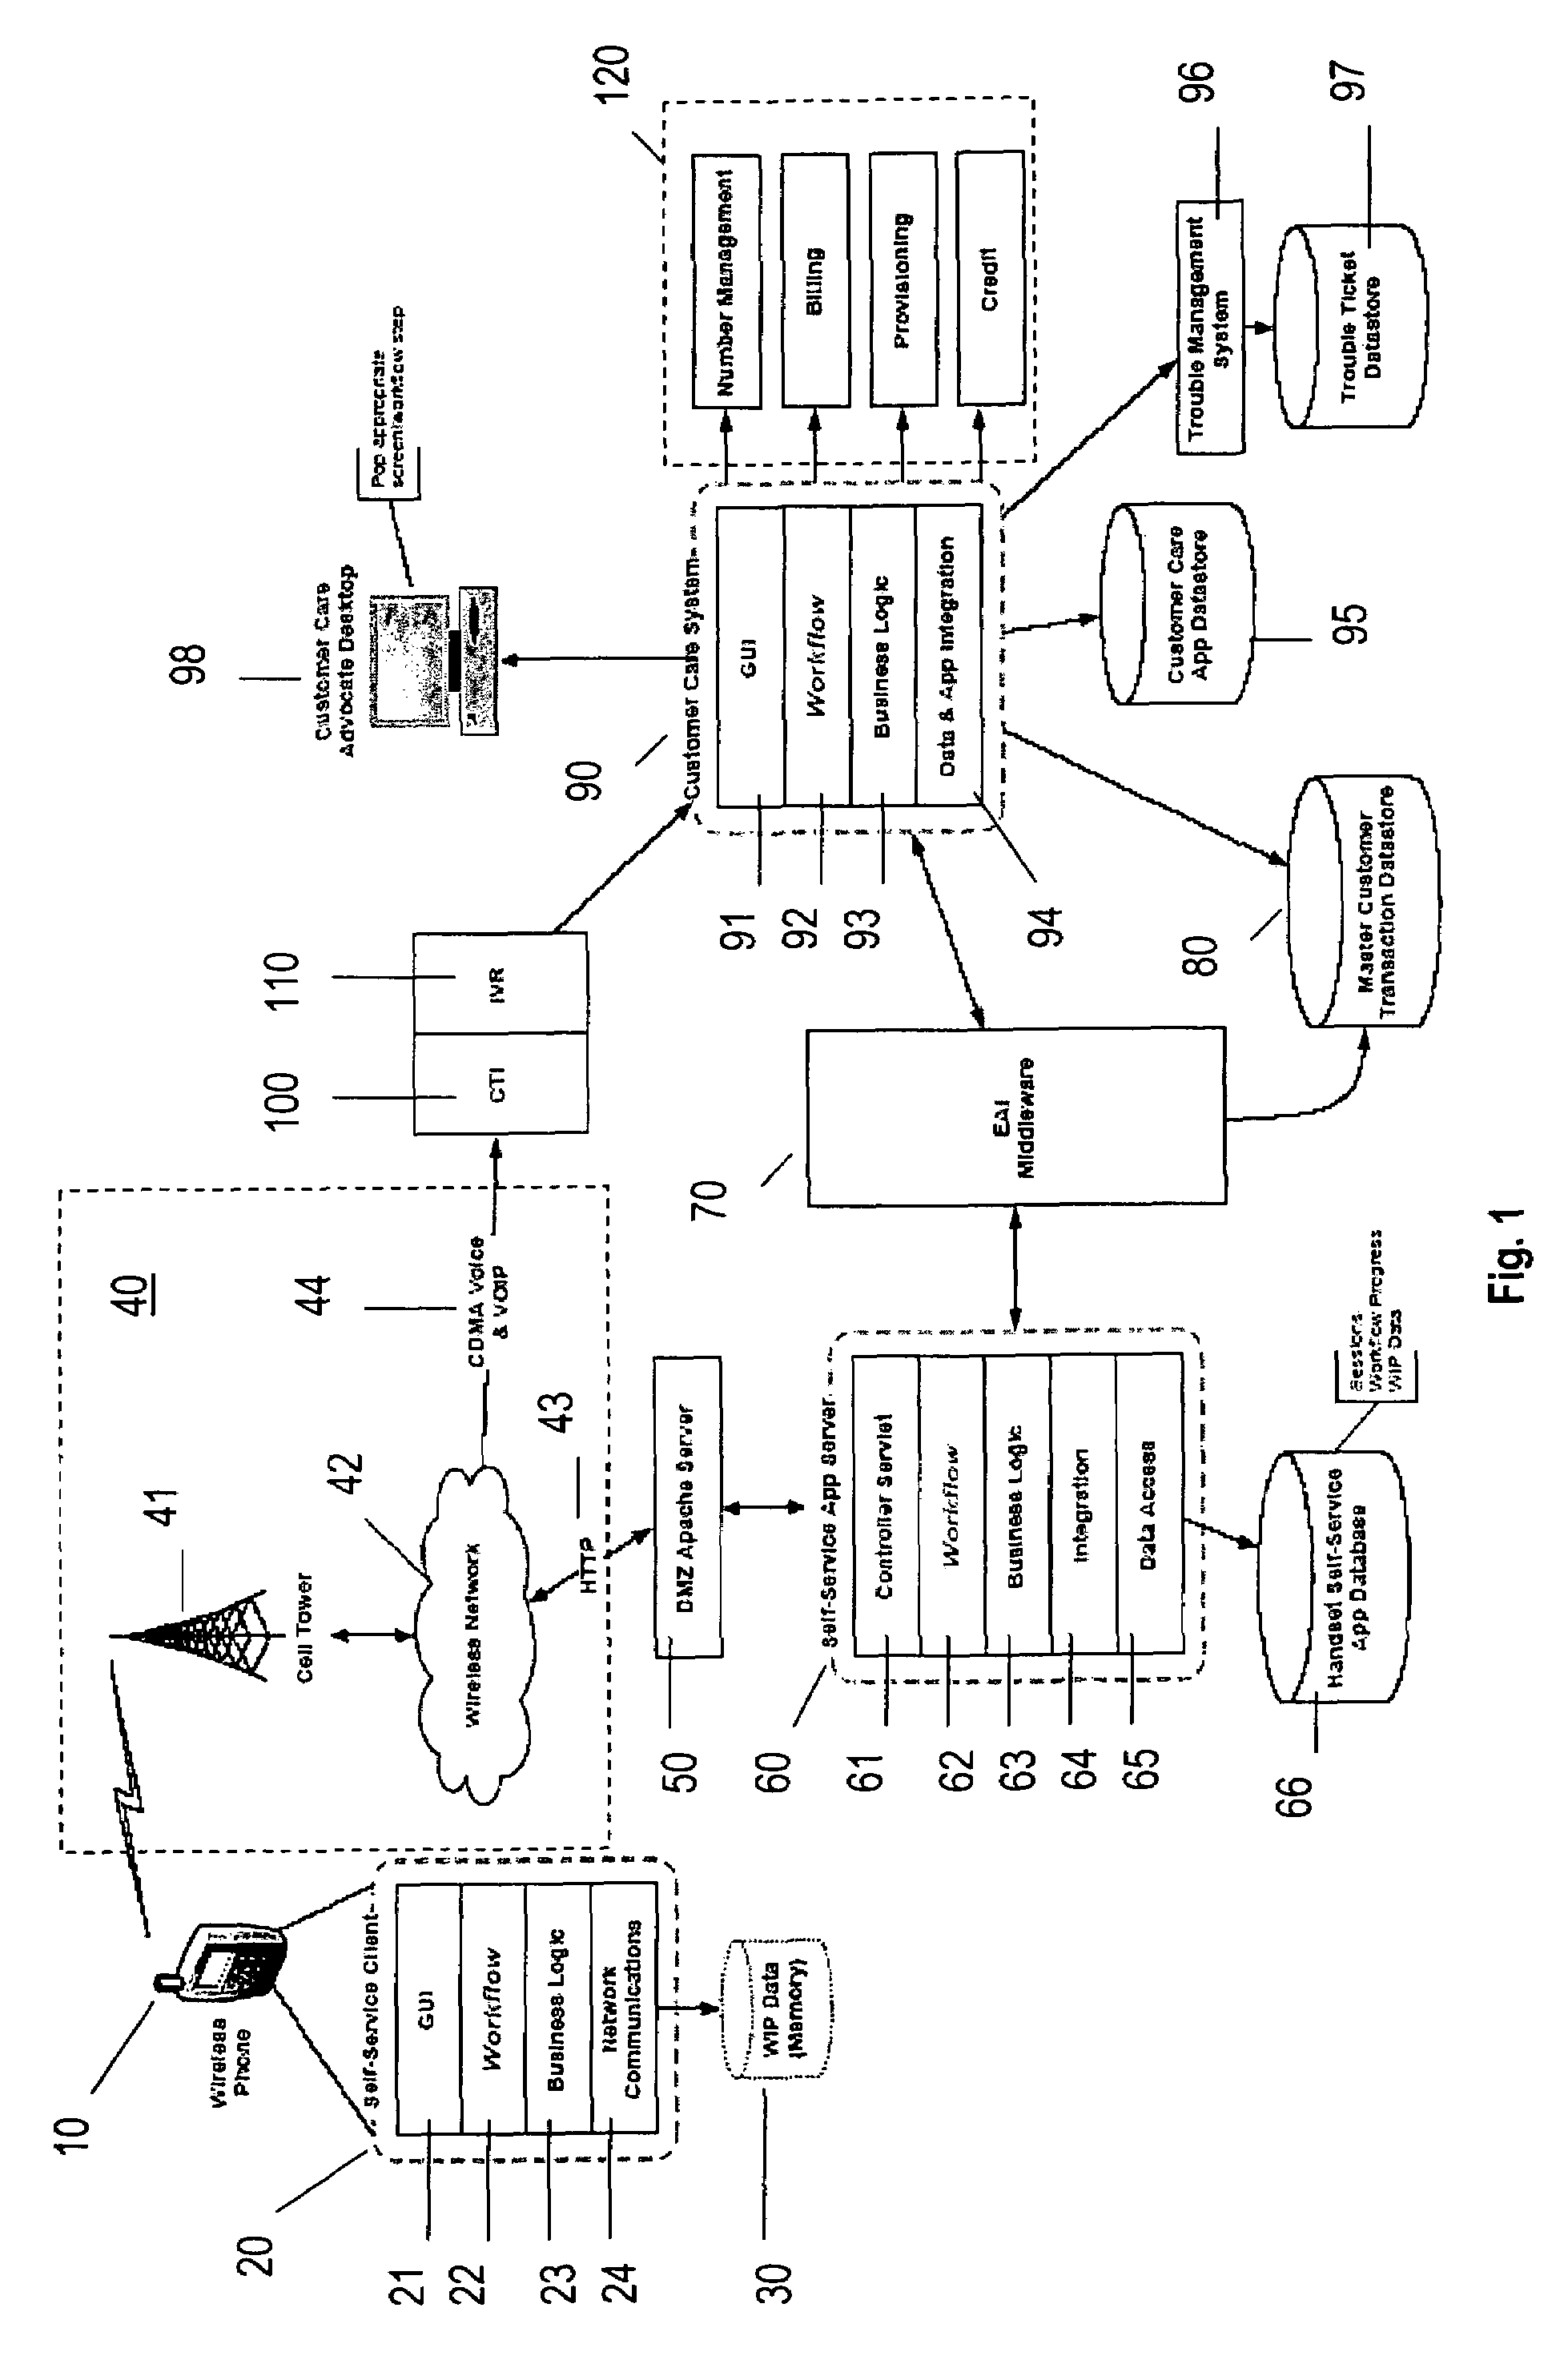 Systems and methods for enabling customer care assistance with self-service transactions